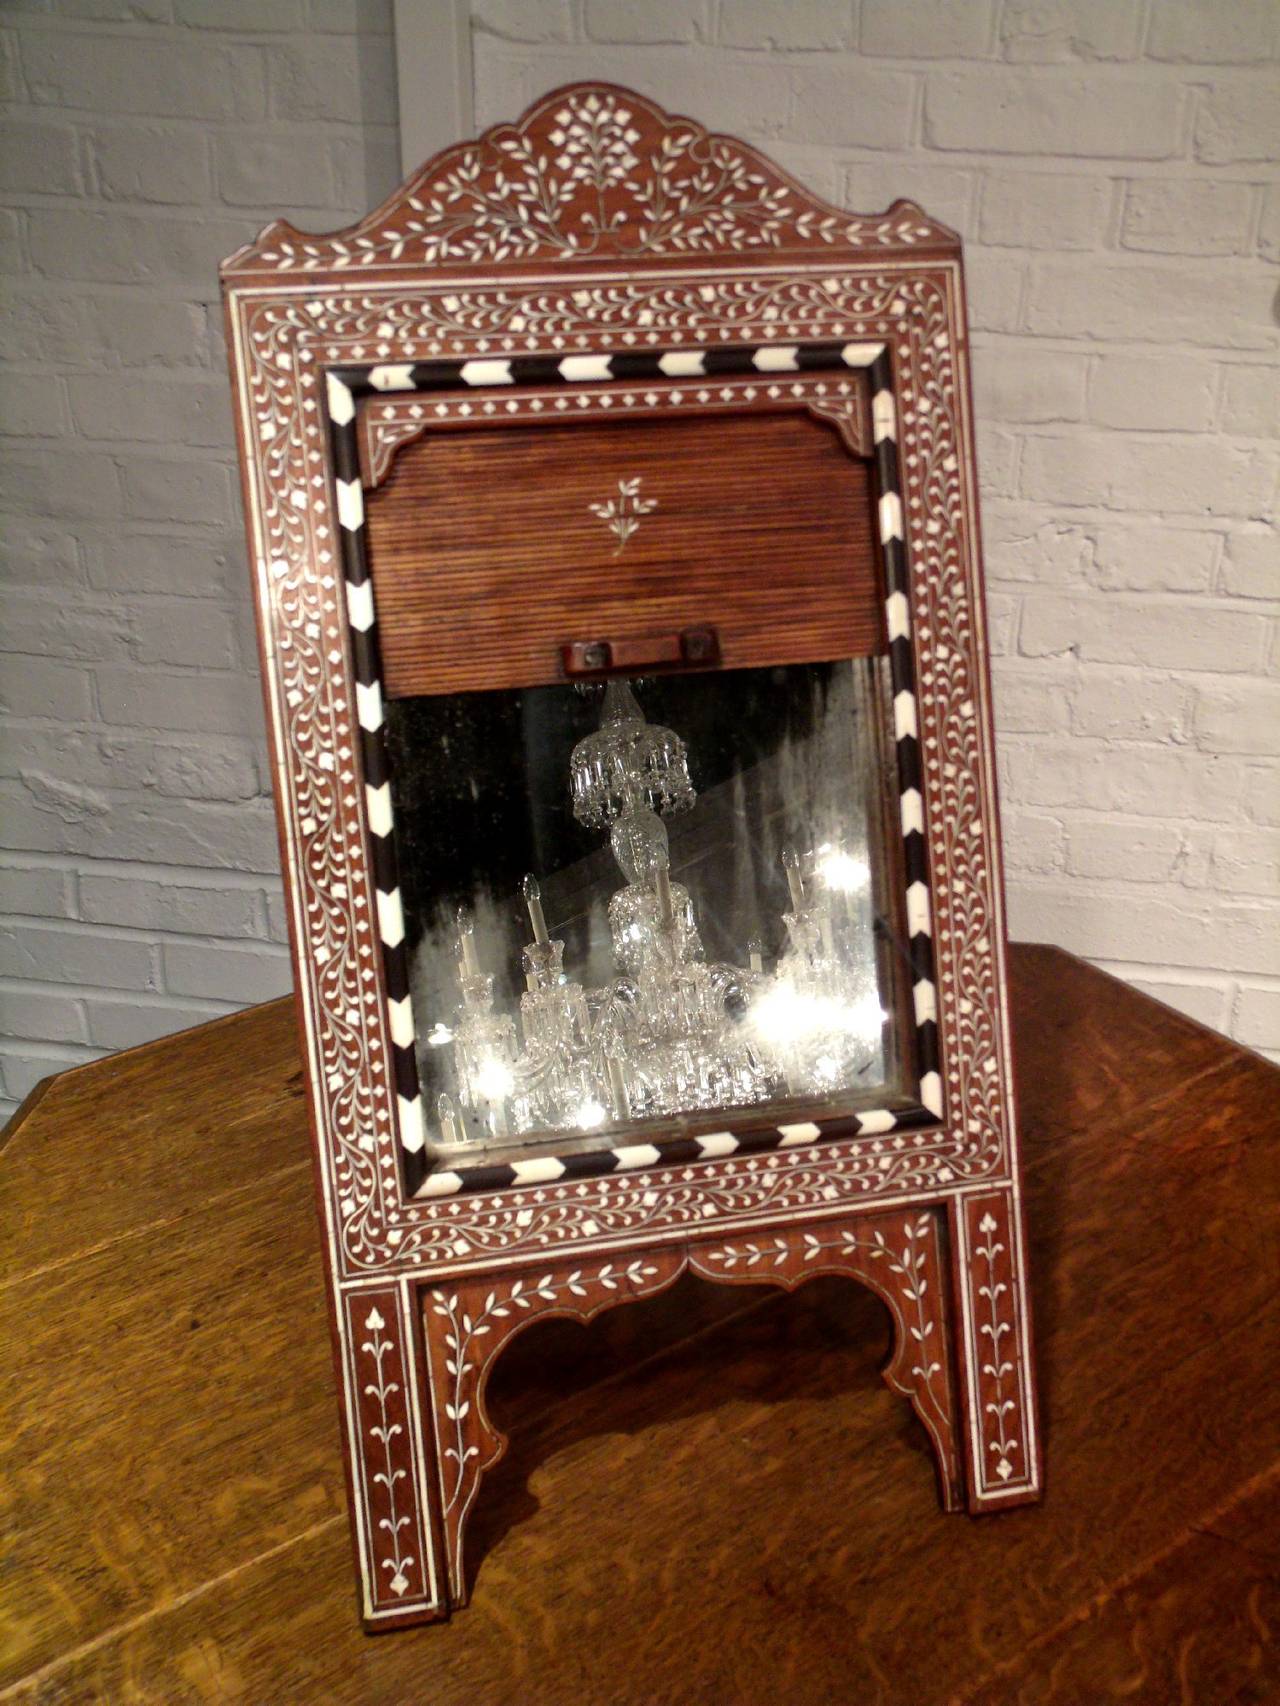 Late 19th century Moorish hardwood easel mirror. This 19th century Moorish hardwood easel mirror features a very ornate floral design inlaid with ebony and bone. The easel features a deep box back that measures 2 in–5 cm, with a tambour front also